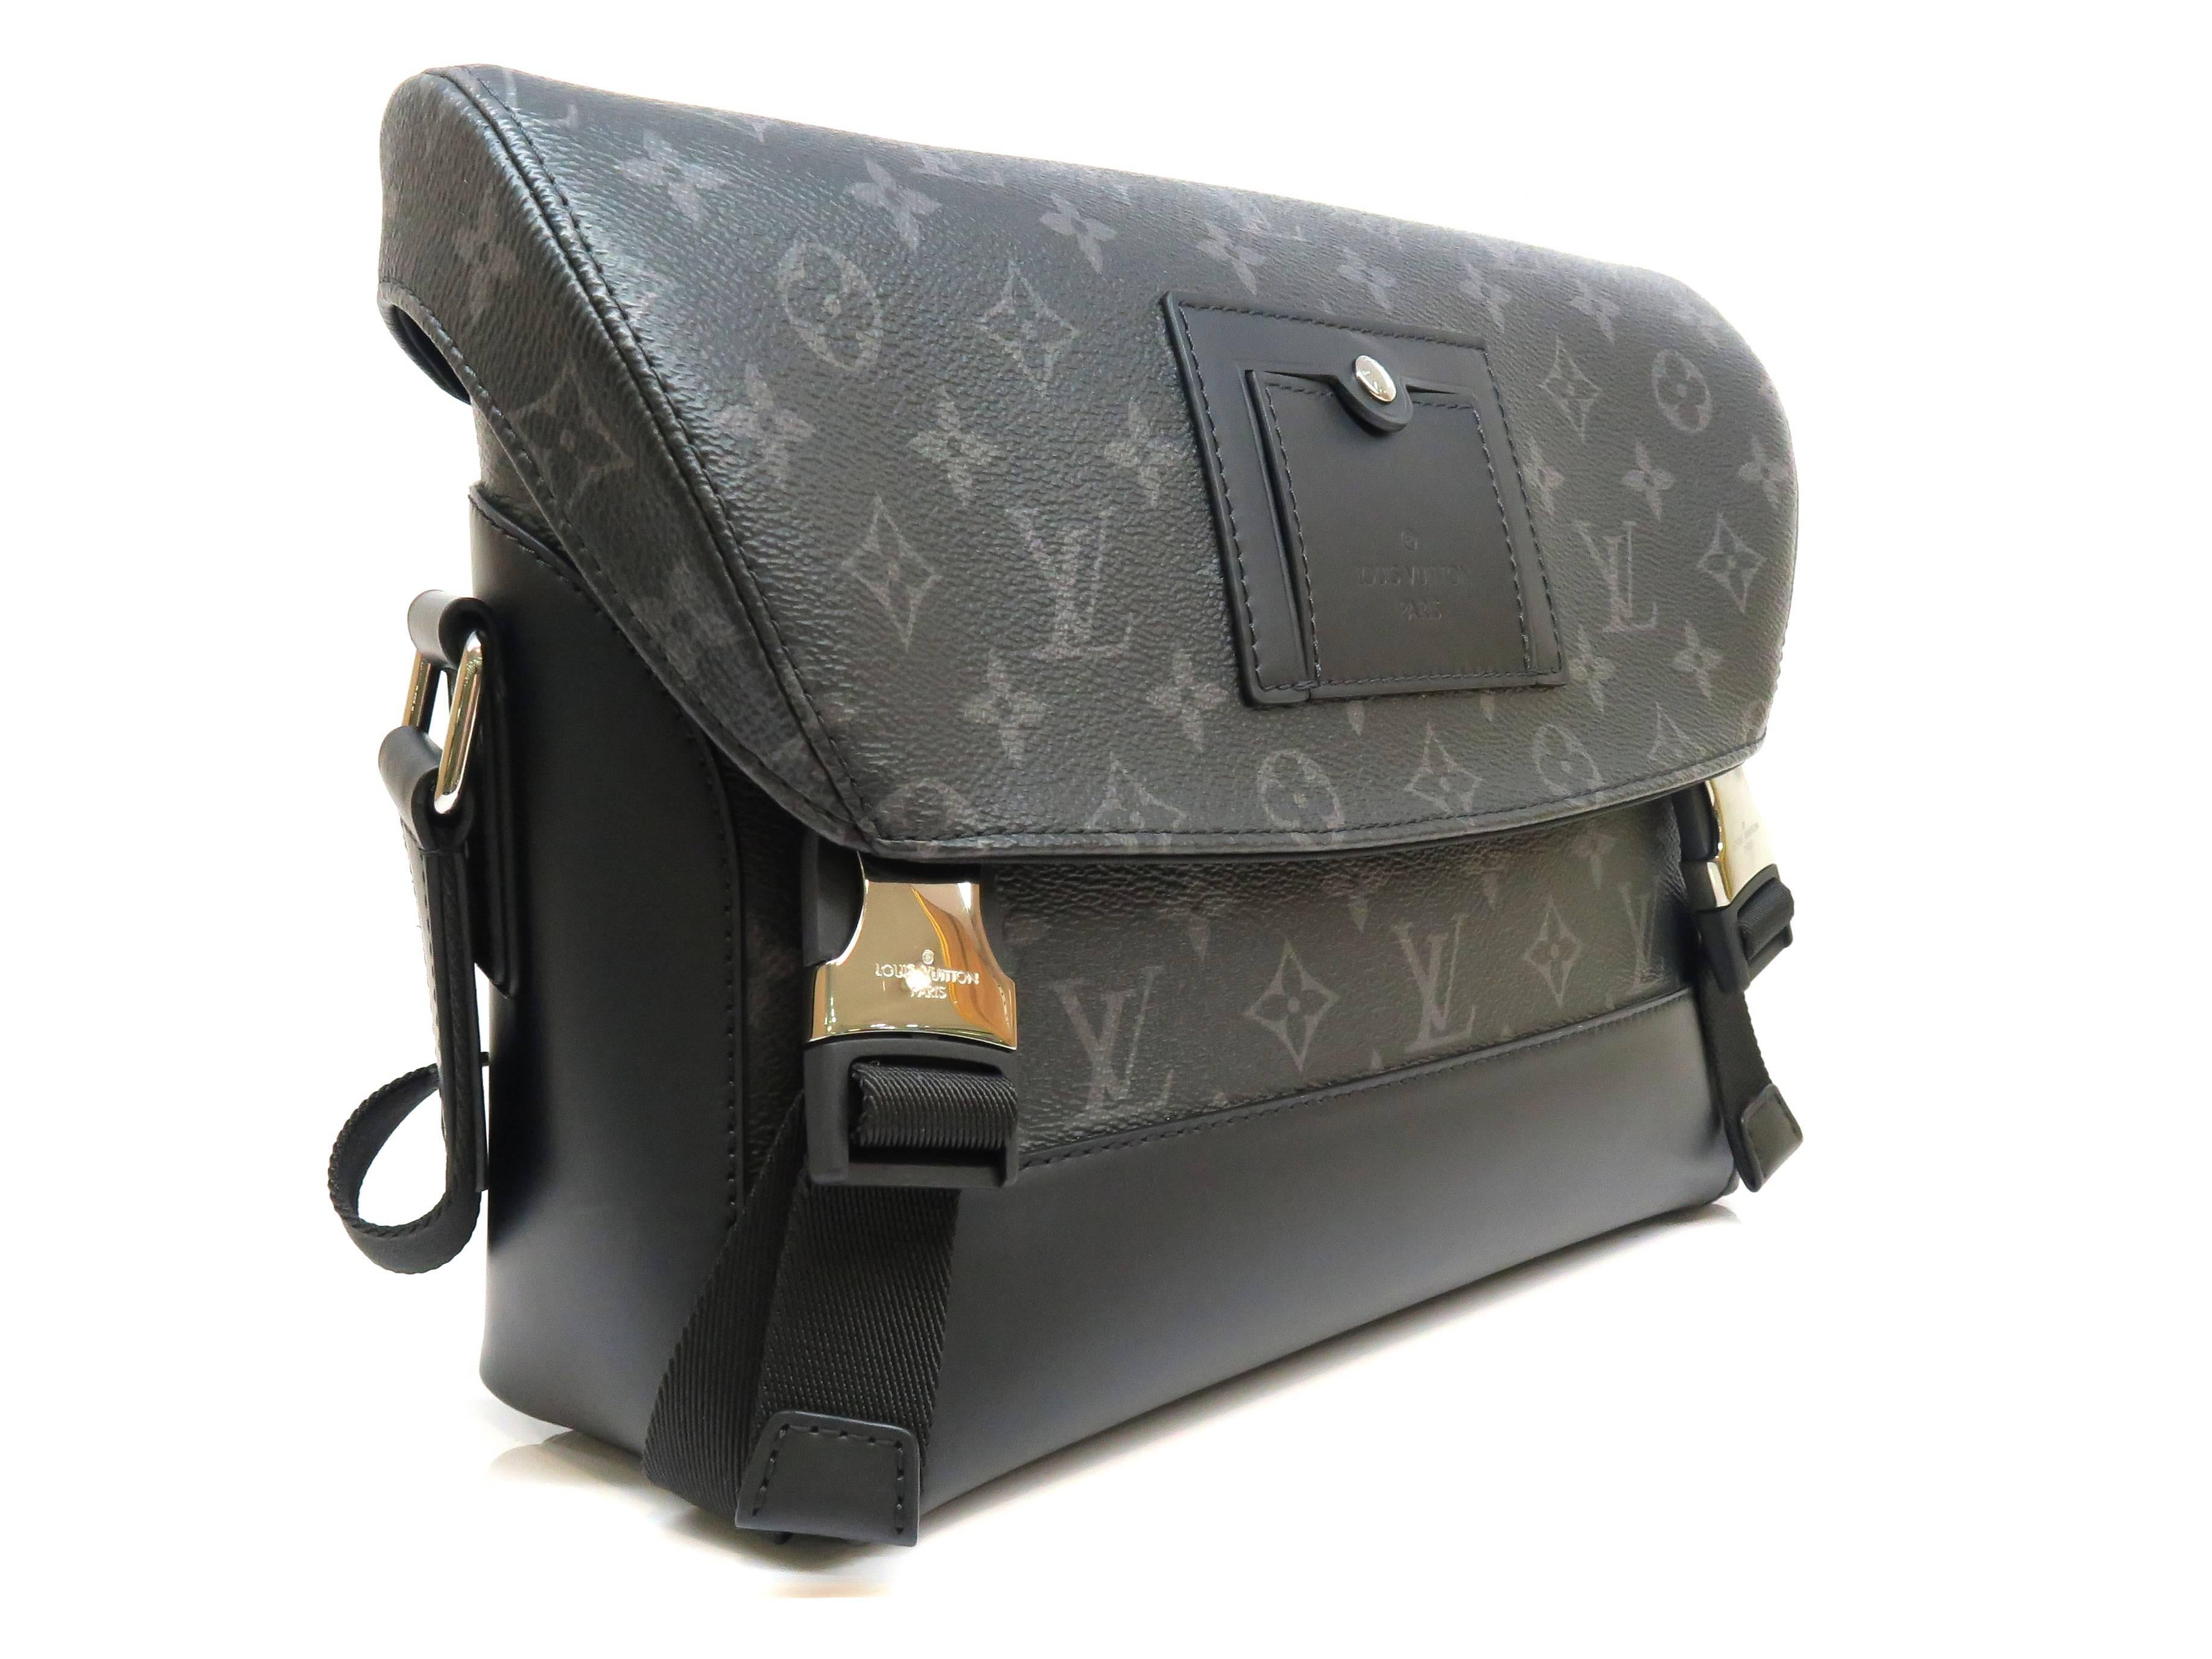 Color: Charcoal Black
Material: Monogram Eclipse Canvas

Condition:
Rank S
Overall: Almost New
Surface:Good
Corners:Minor Scratches 
Edges:Good
Handles/Straps:Minor Scratches 
Hardware:Minor Scratches

Dimensions:
W34 × H28 × D1.5cm（W13.3